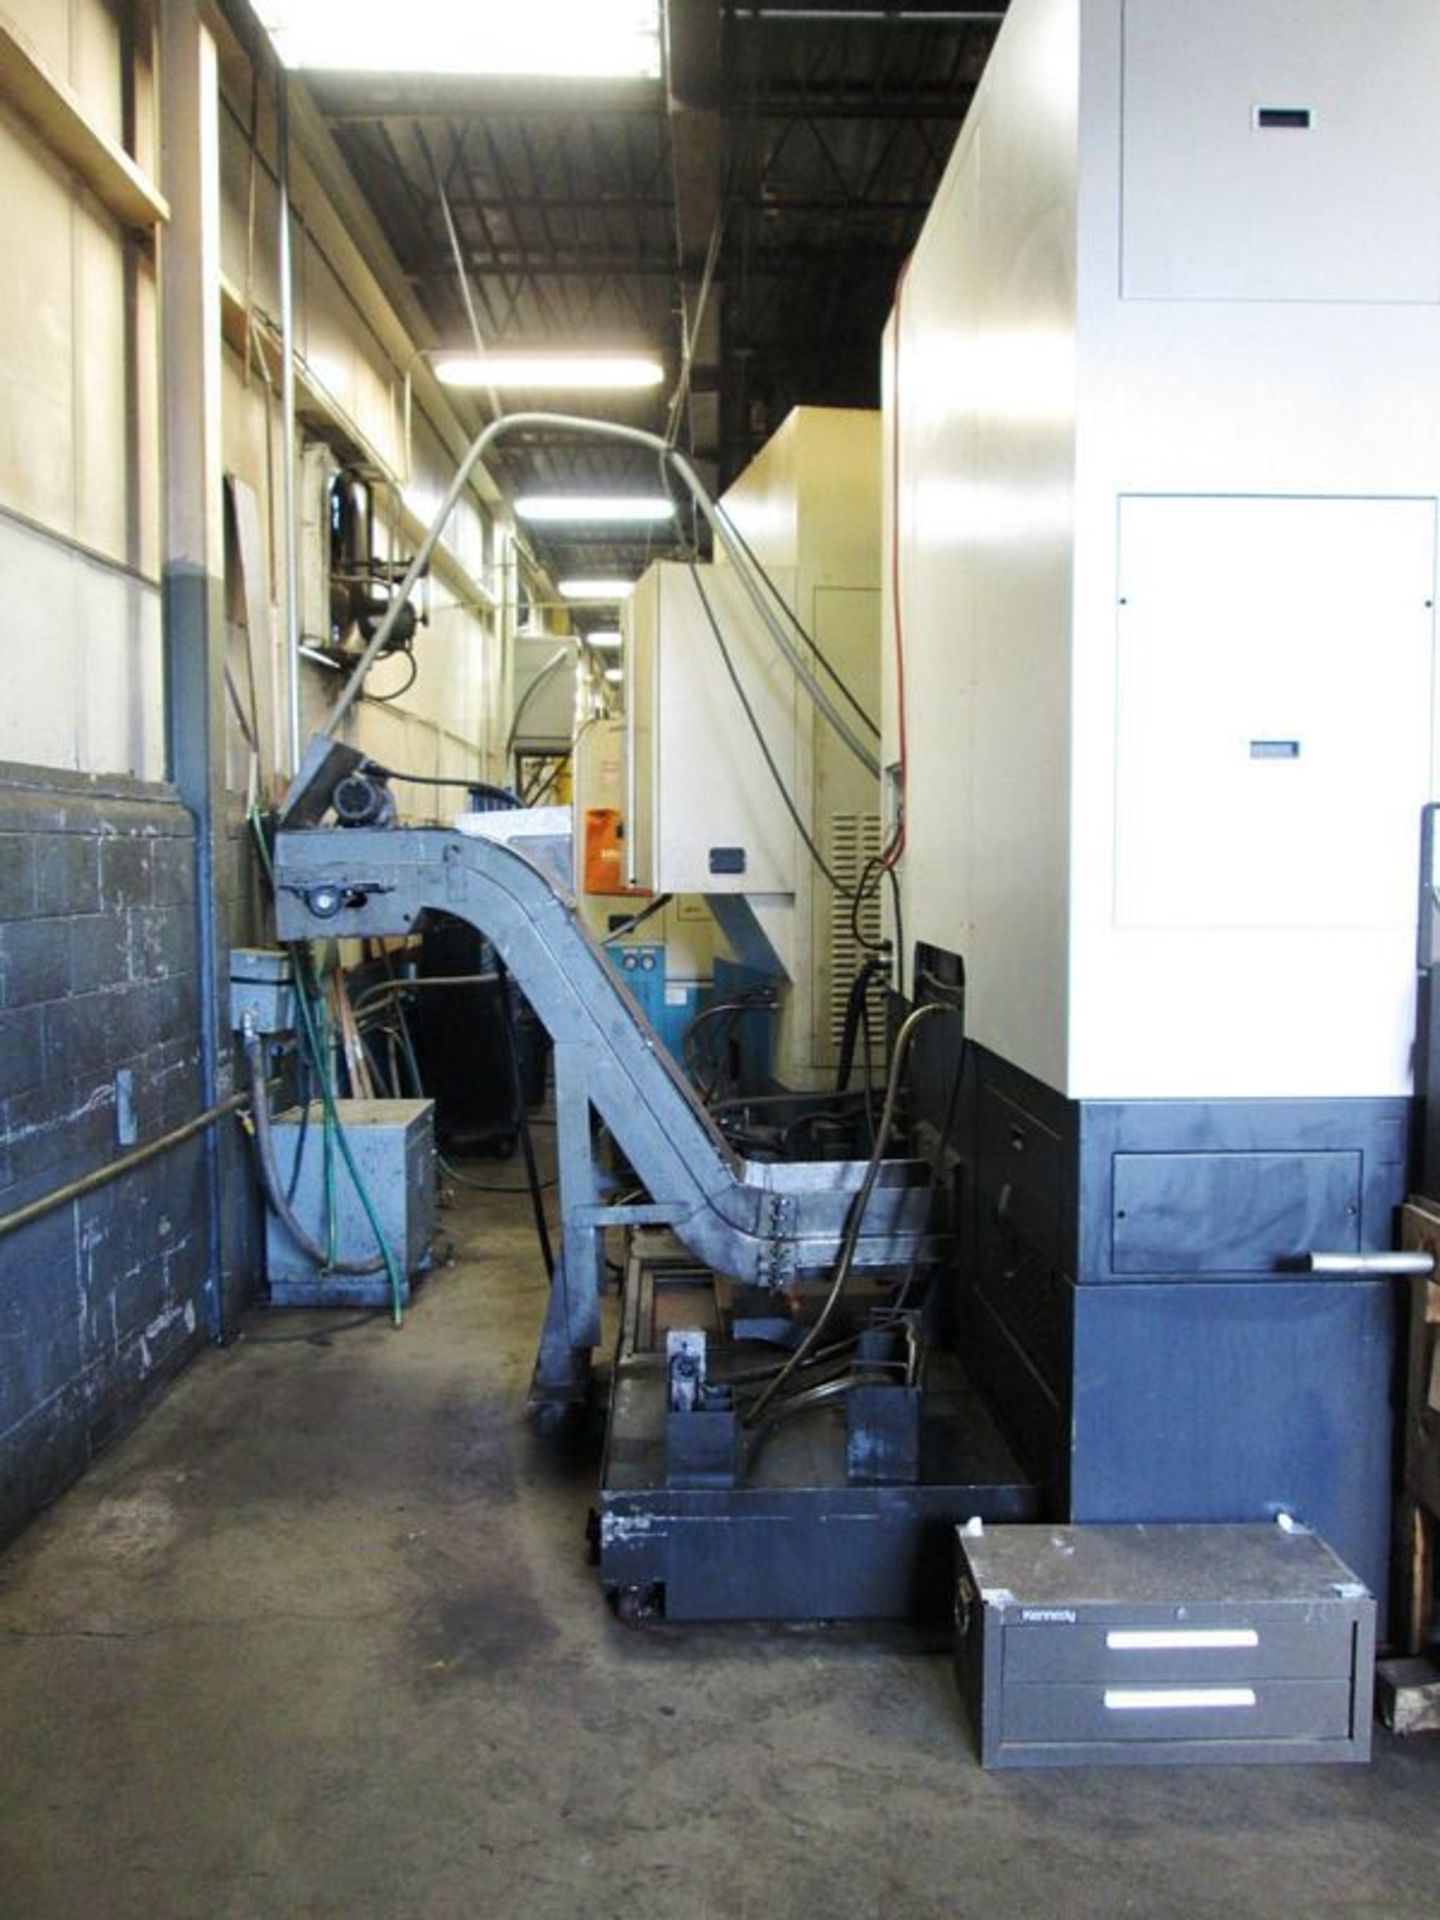 40" DOOSAN VT1100 2-AXIS CNC VERTICAL TURNING CENTER LATHE, NEW 2011 - Image 7 of 8